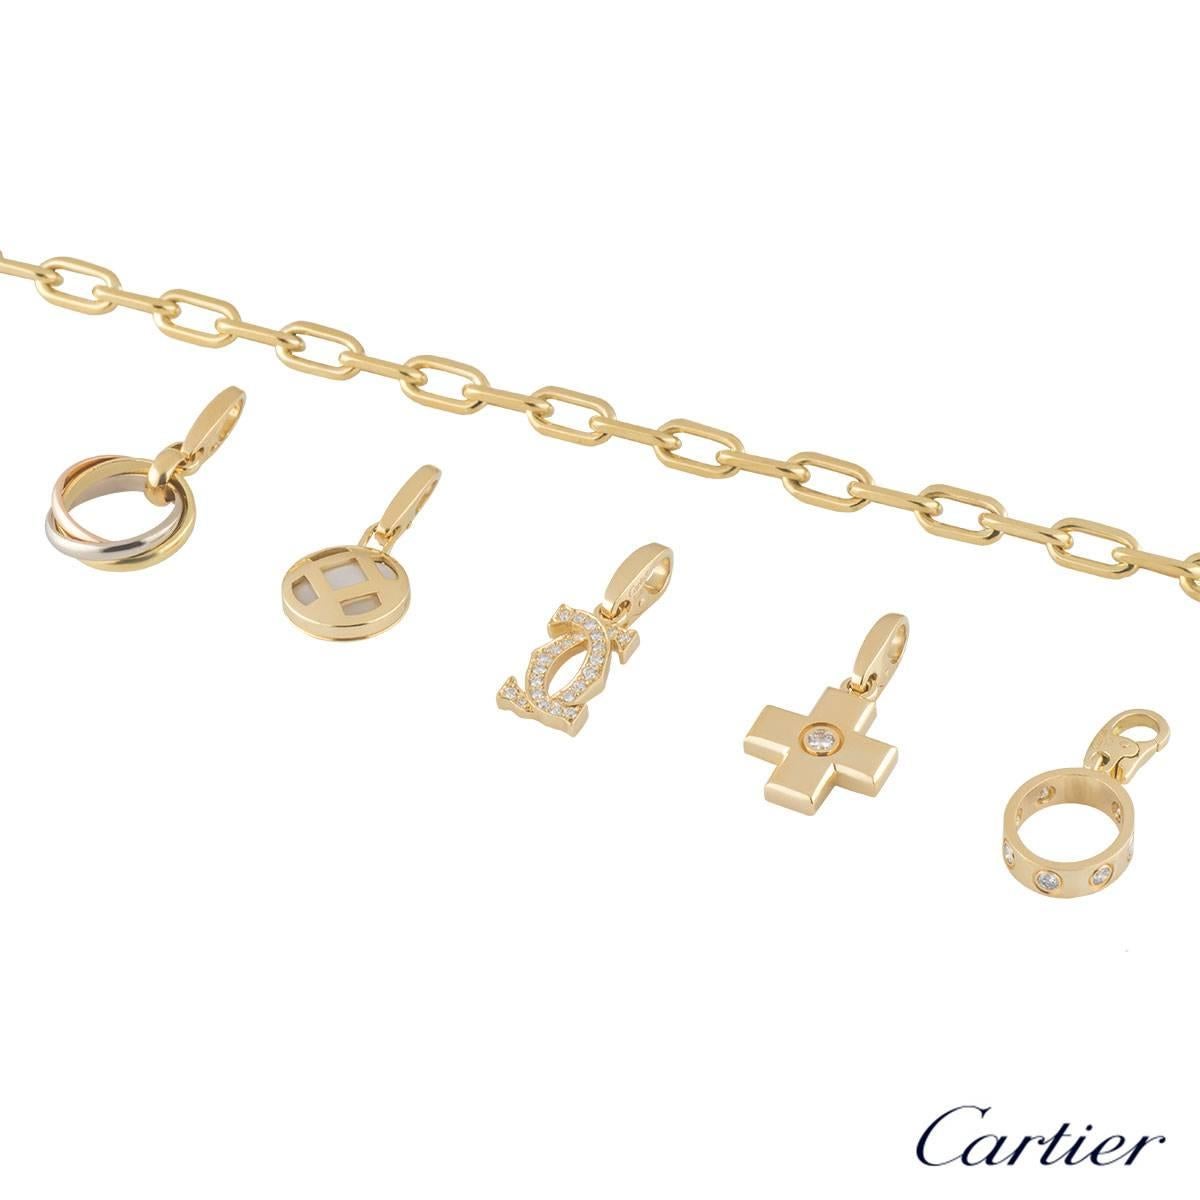 A unique 18k yellow gold Cartier charm bracelet. The bracelet comprises of a yellow gold flat cable chain with 5 Cartier charms. The first charm is a mini trinity de cartier ring in tri colour gold. The second charm is a mini pasha motif with a